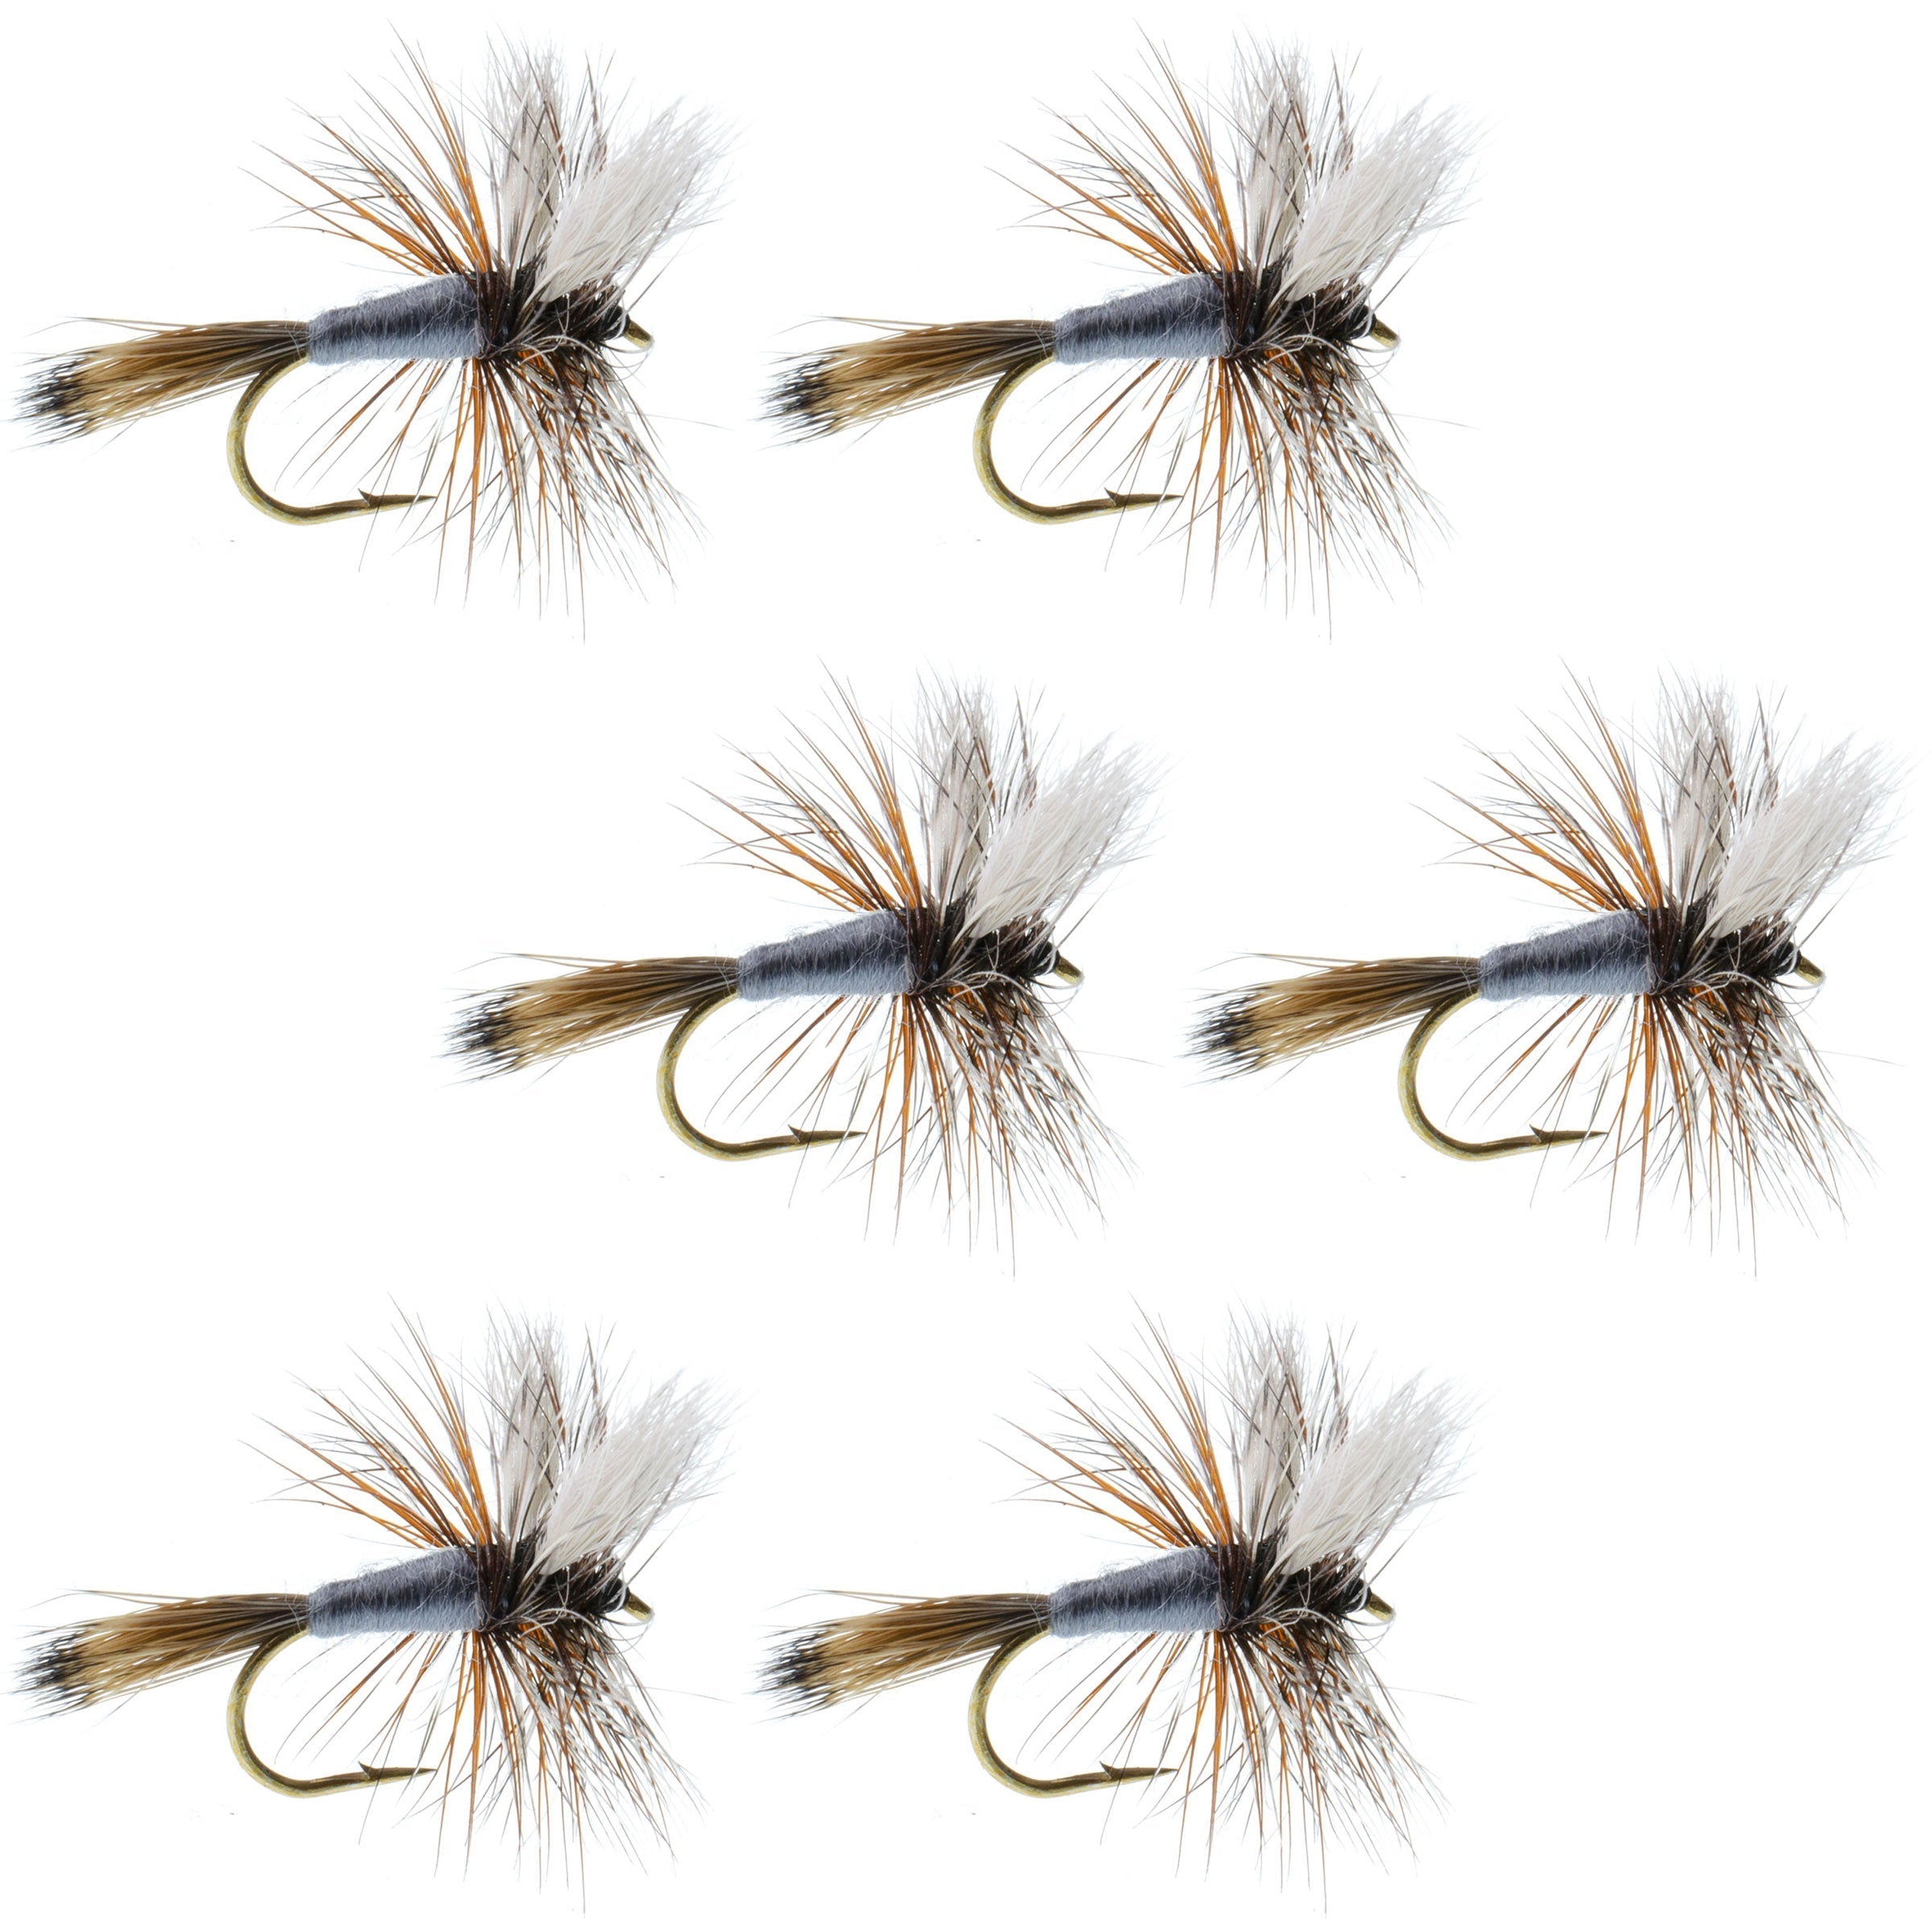 Outdoor Planet 36Pieces Pack 1 Essential Nymphs Flies/Wet Flies/Dry Flies/Streamer/Hopper  Trout Fly Assortment for Fly Fishing Flies + Waterproof Fly Fishing Box :  : Sports, Fitness & Outdoors